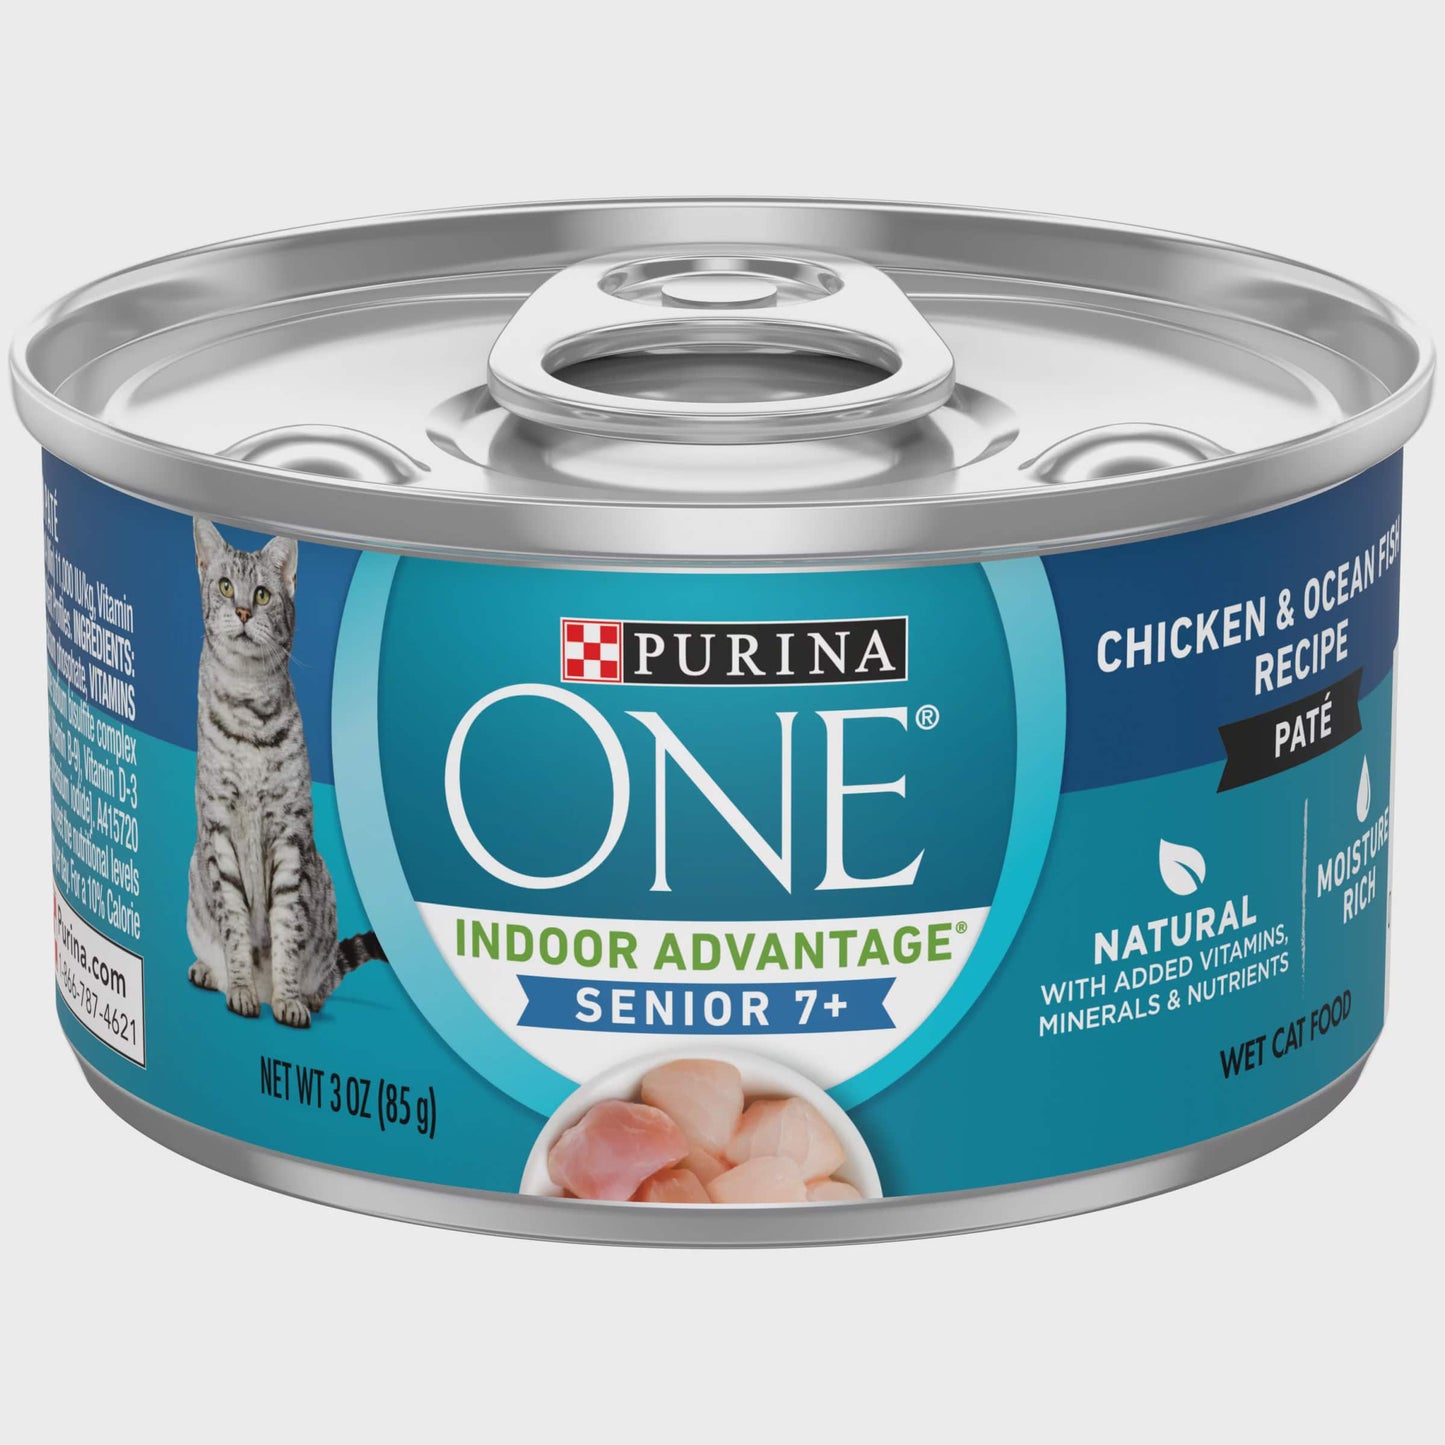 Purina ONE Grain Free, Natural Senior Pate Wet Cat Food, Vibrant Maturity 7+ Chicken & Ocean Whitefish Recipe, 3 oz. Pull-Top Can